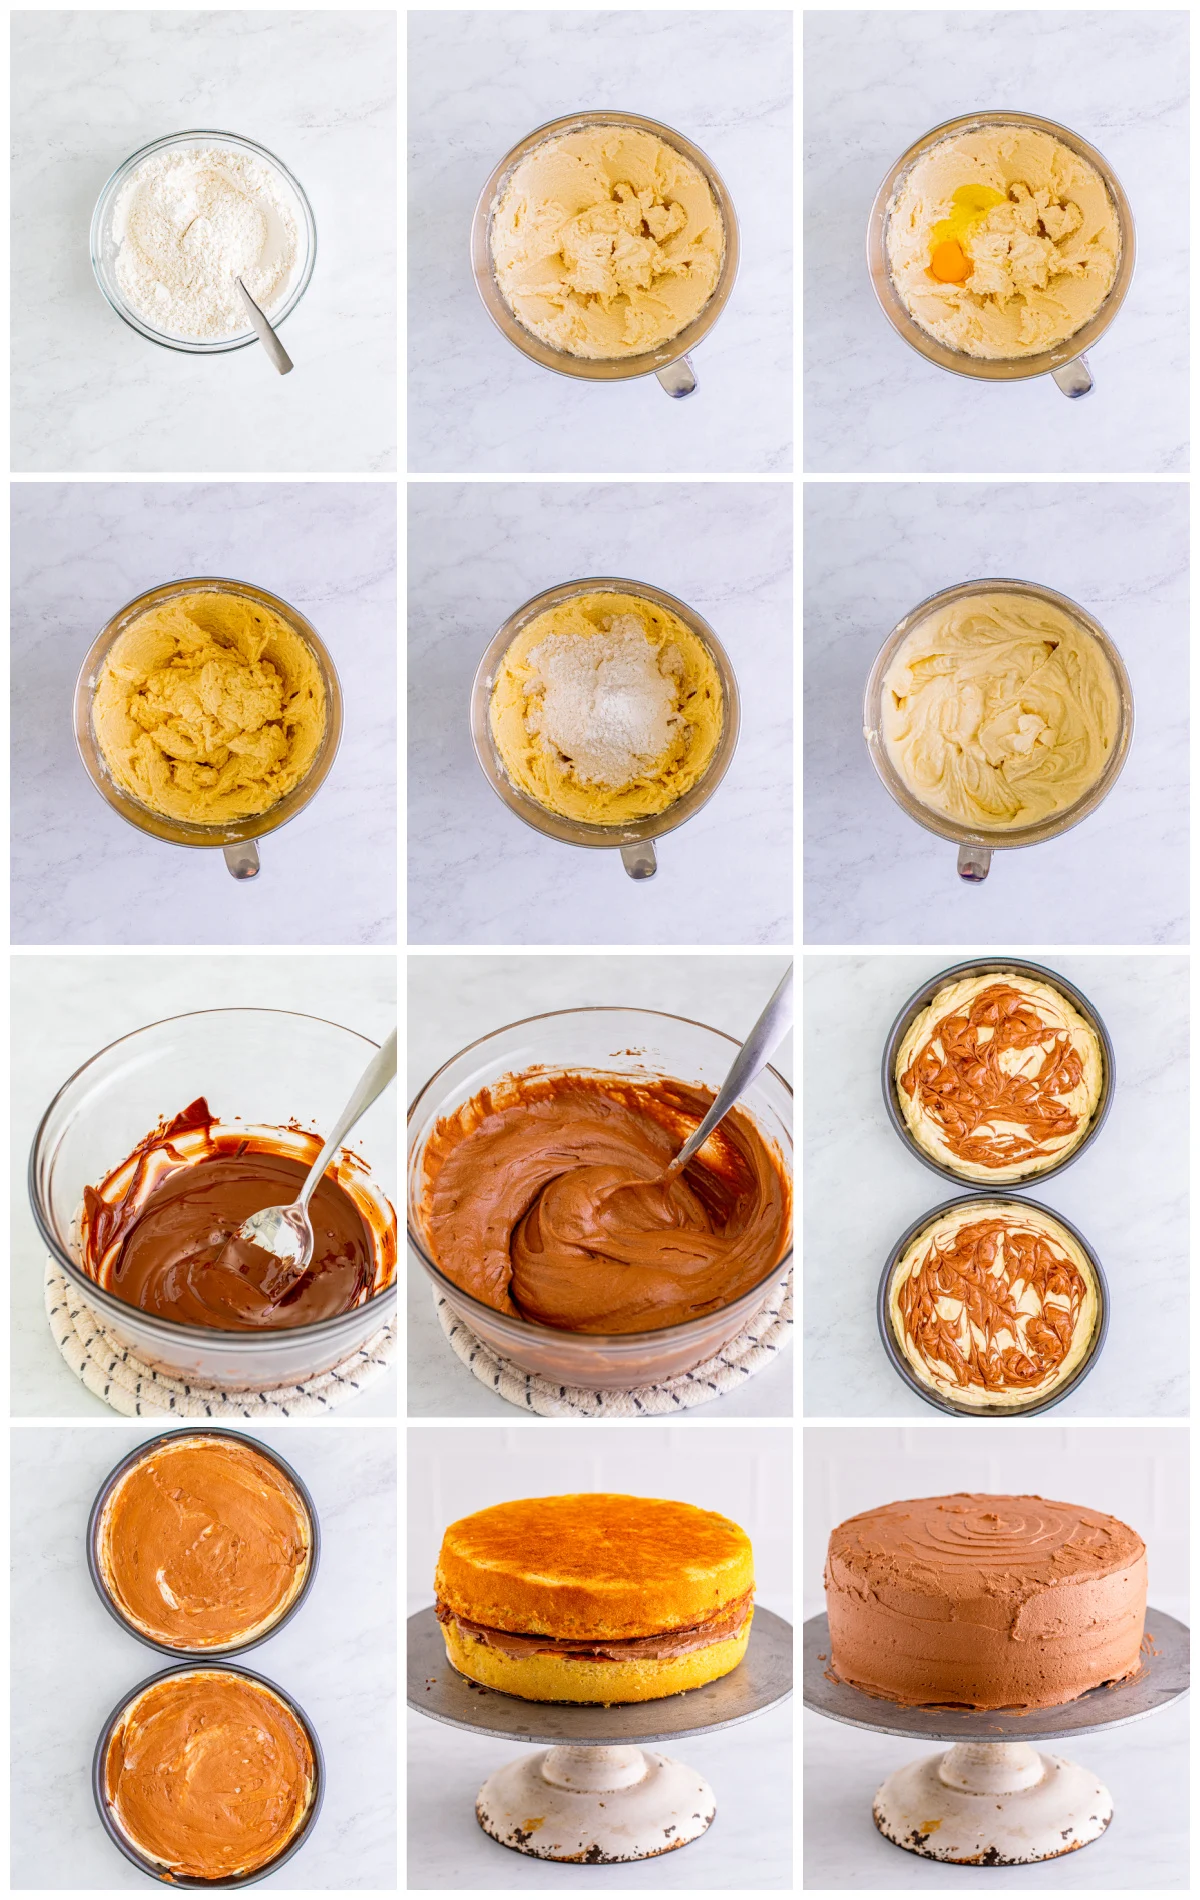 Step by step photos on how to make a Marble Cake Recipe.